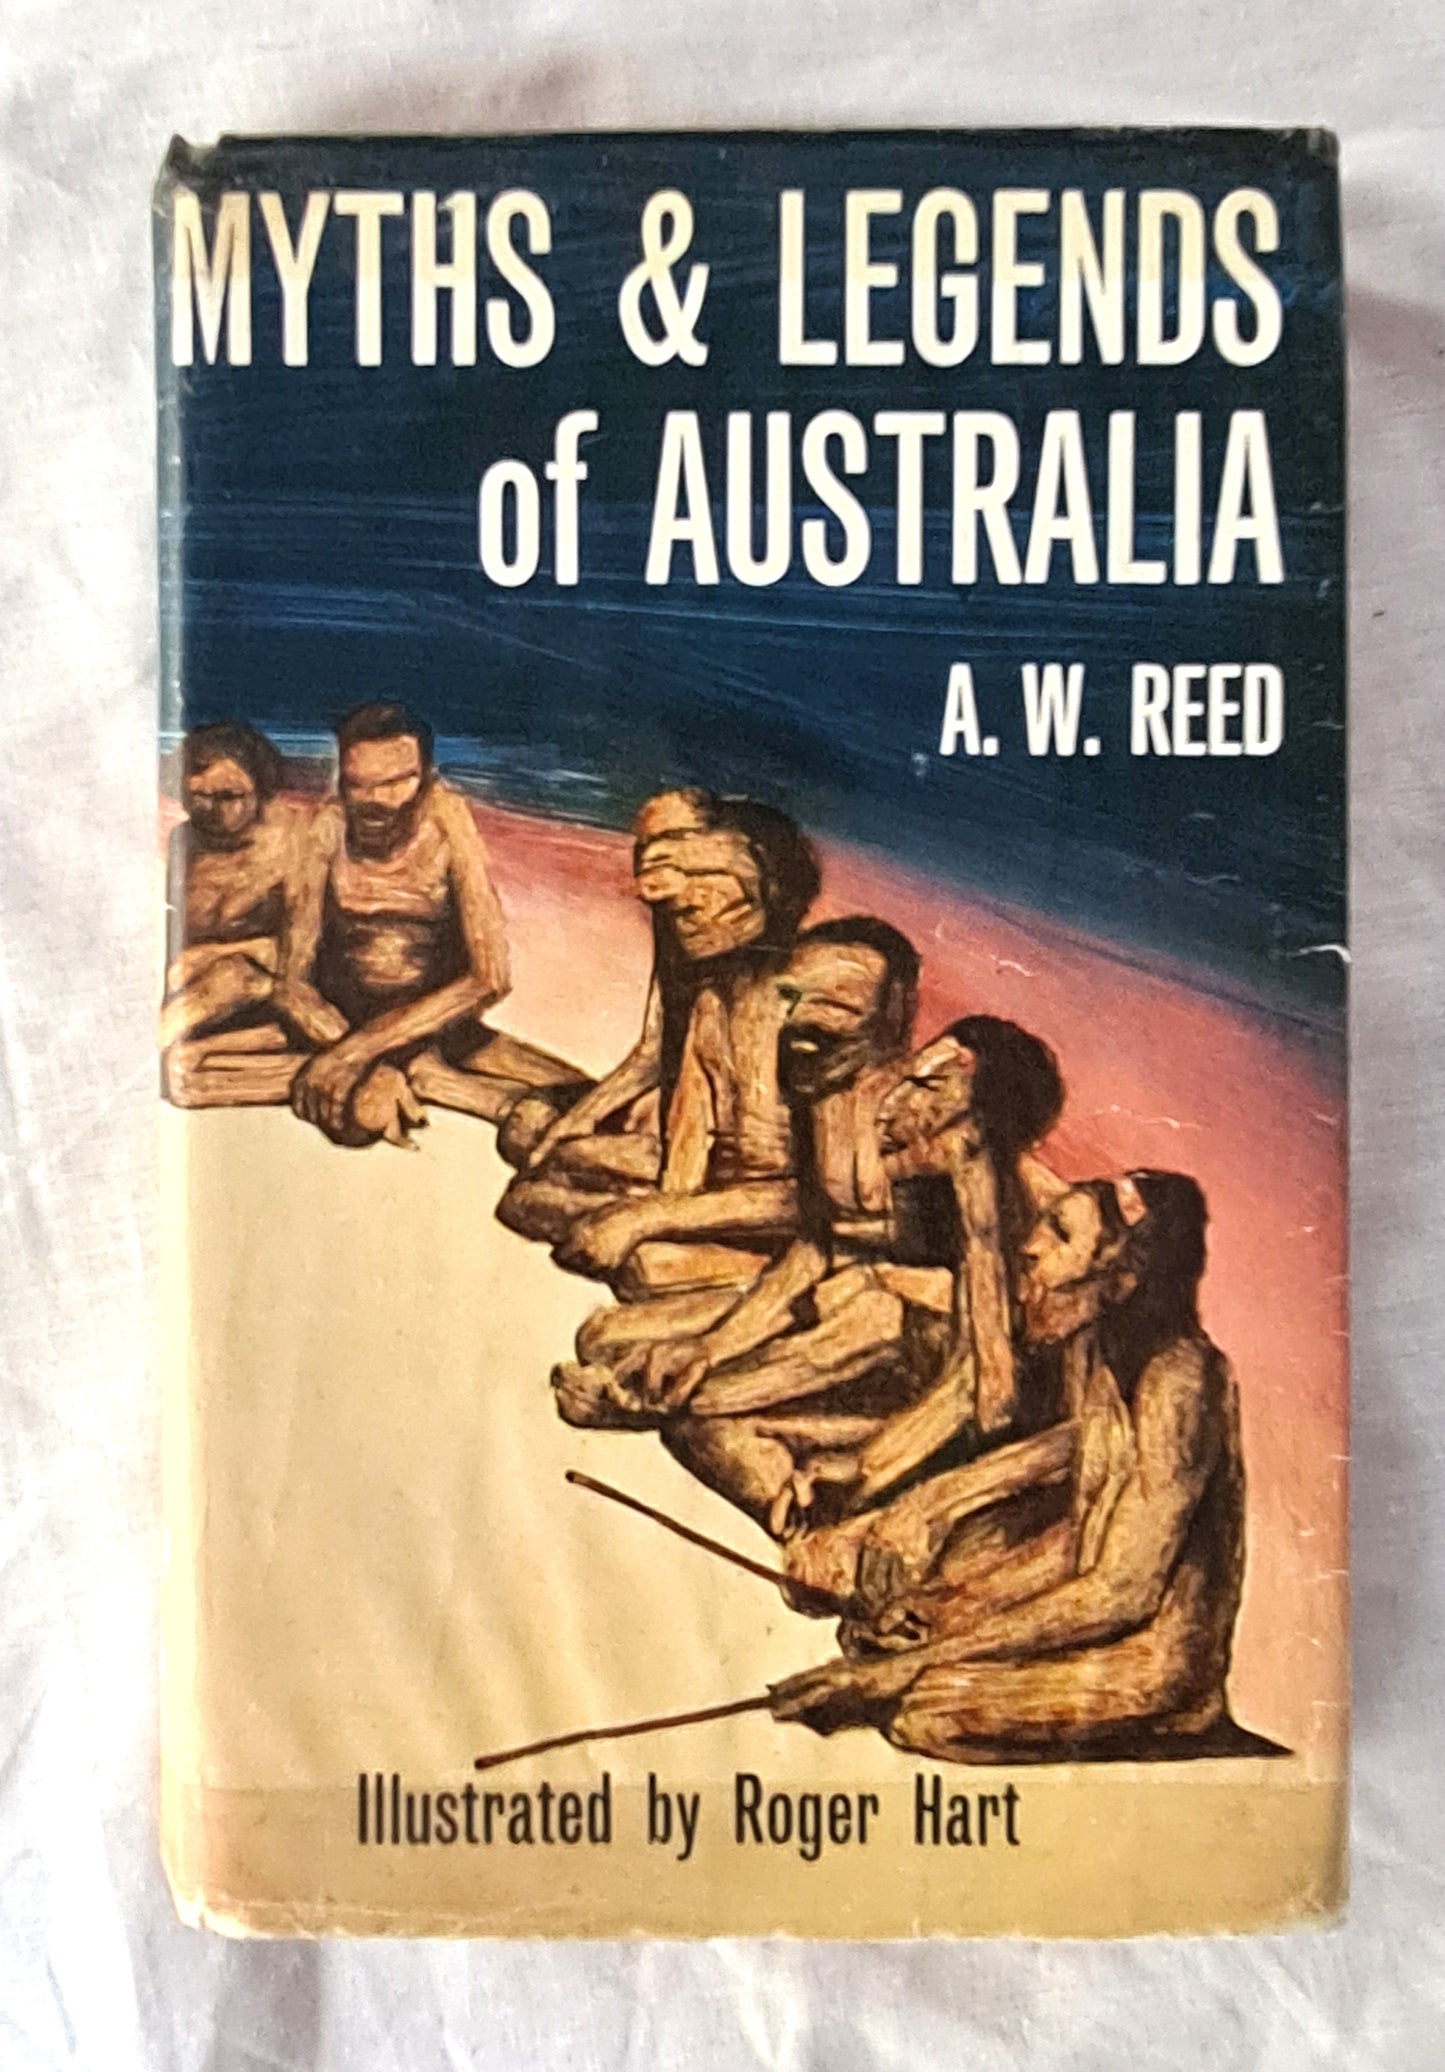 Myths & Legends of Australia  by A. W. Reed  Illustrated by Roger Hart